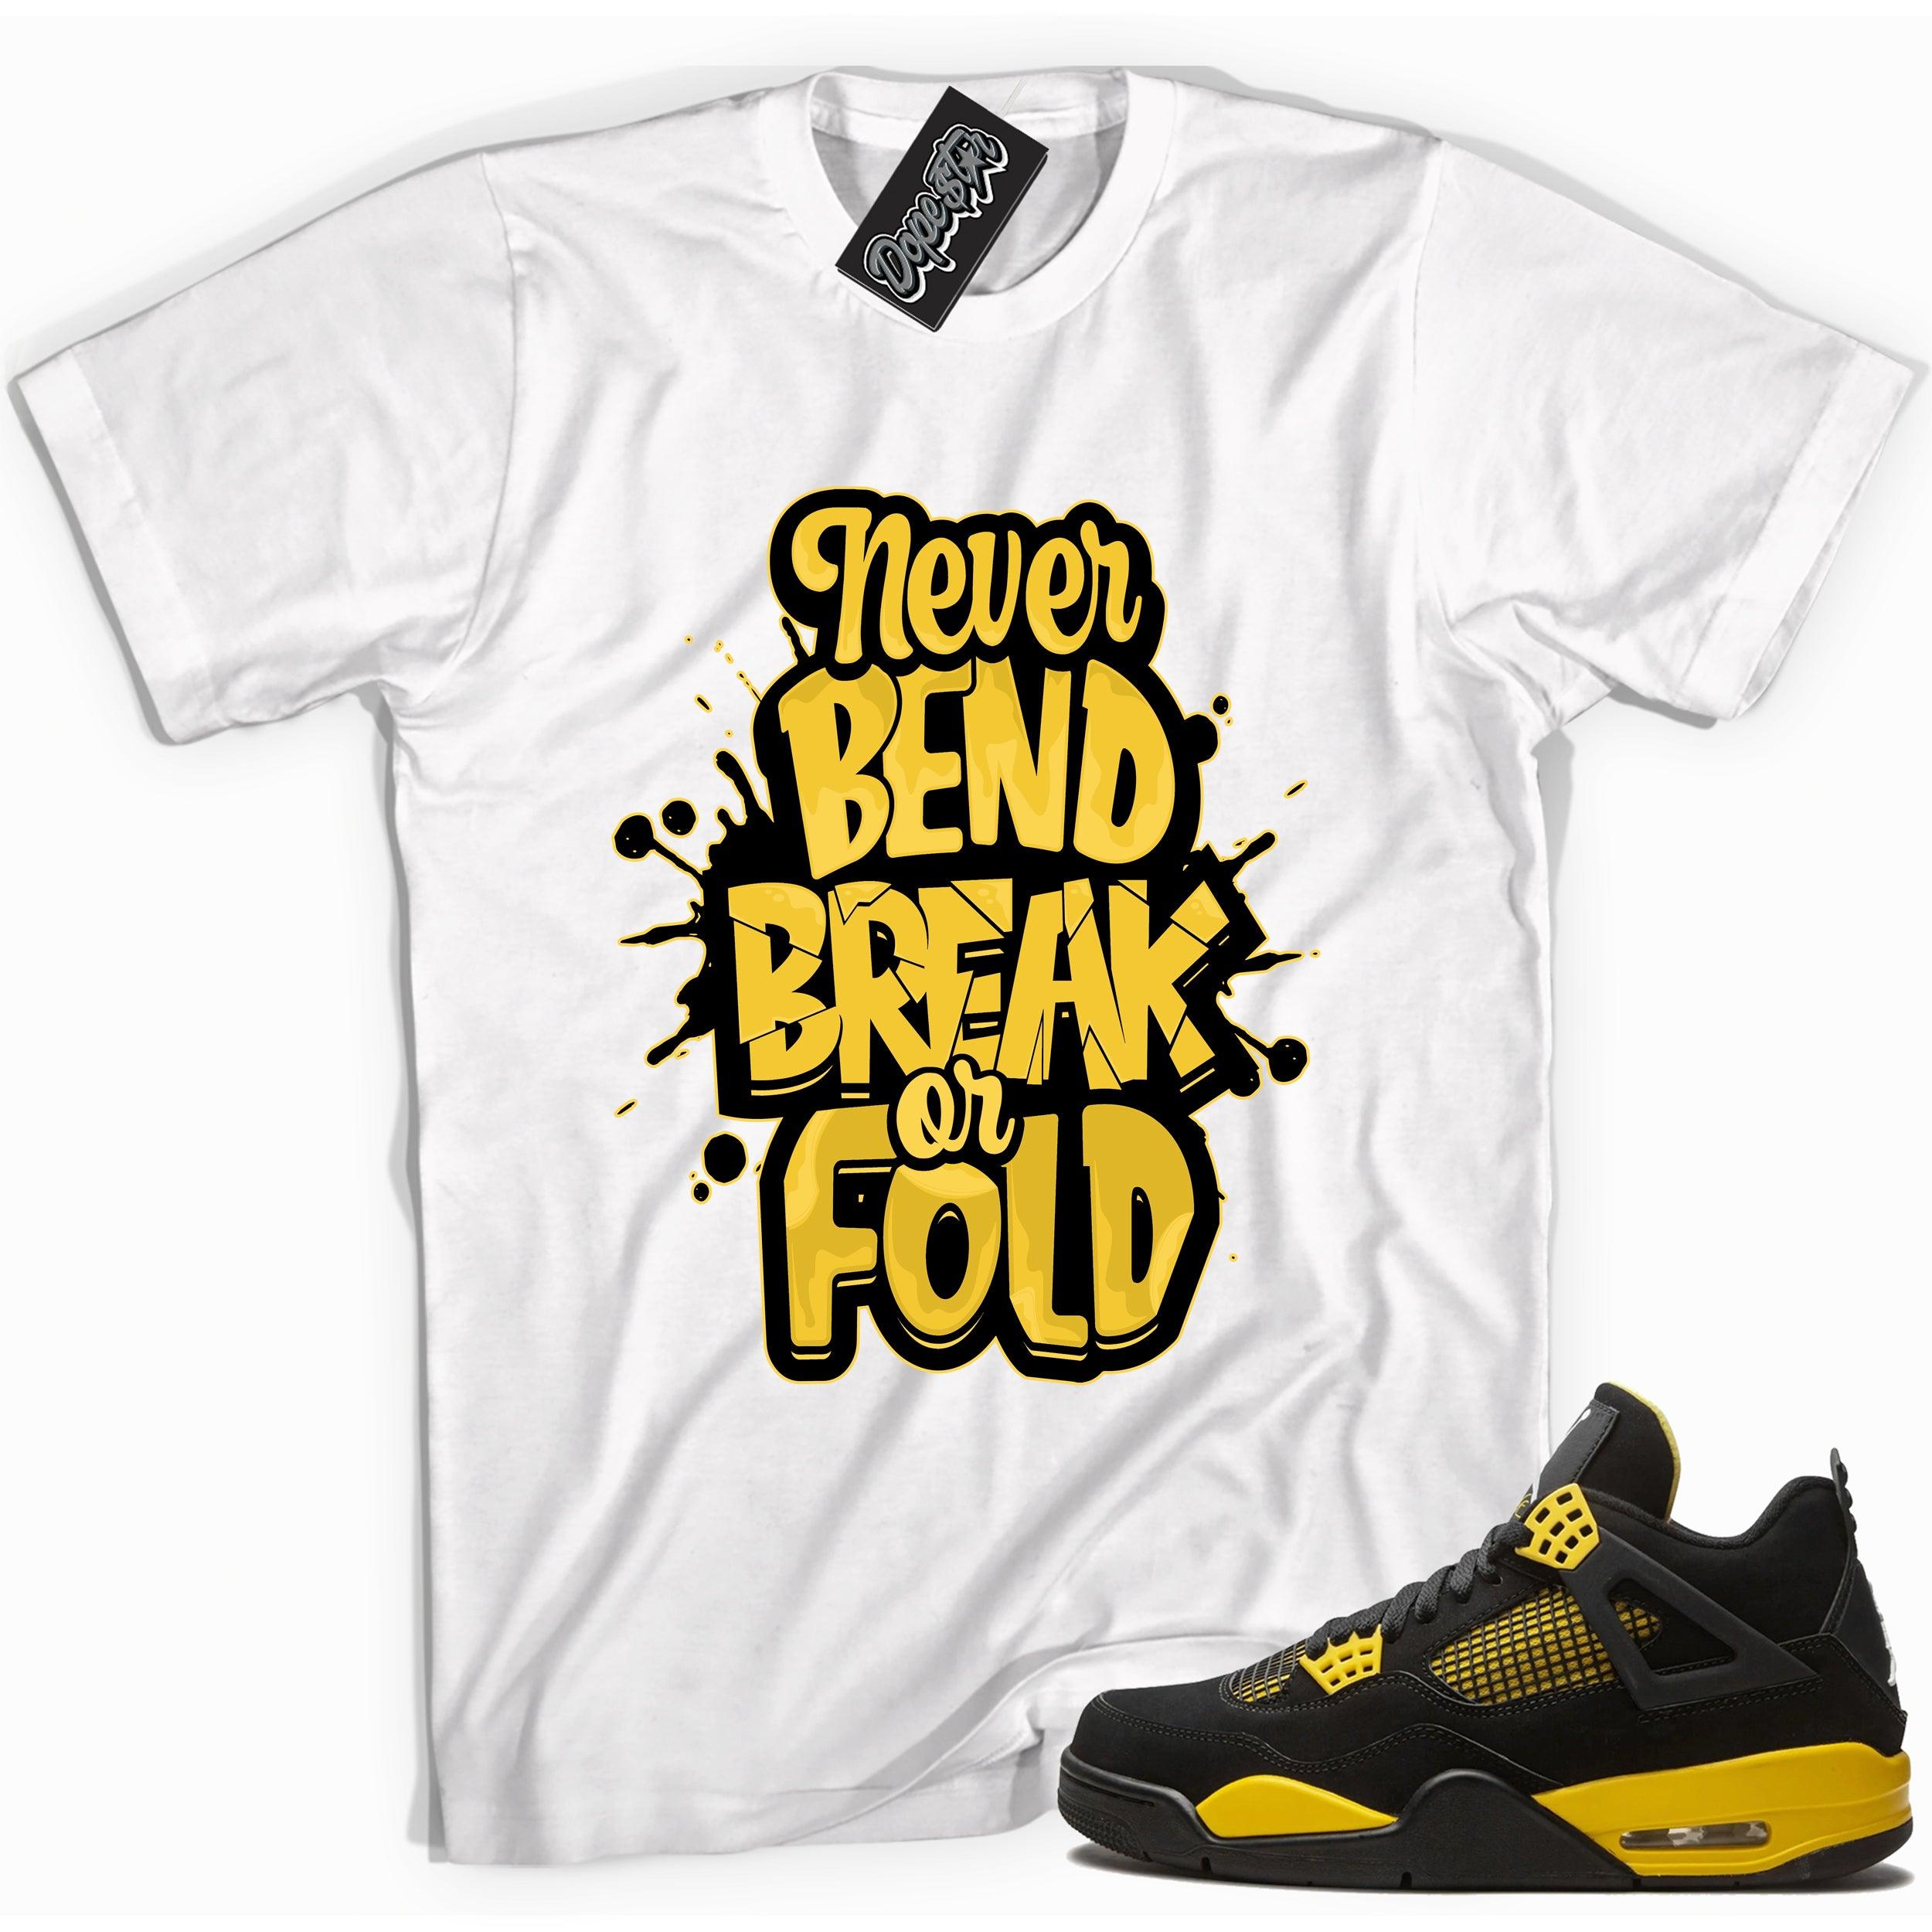 Cool white graphic tee with 'never bend break or fold' print, that perfectly matches Air Jordan 4 Thunder sneakers